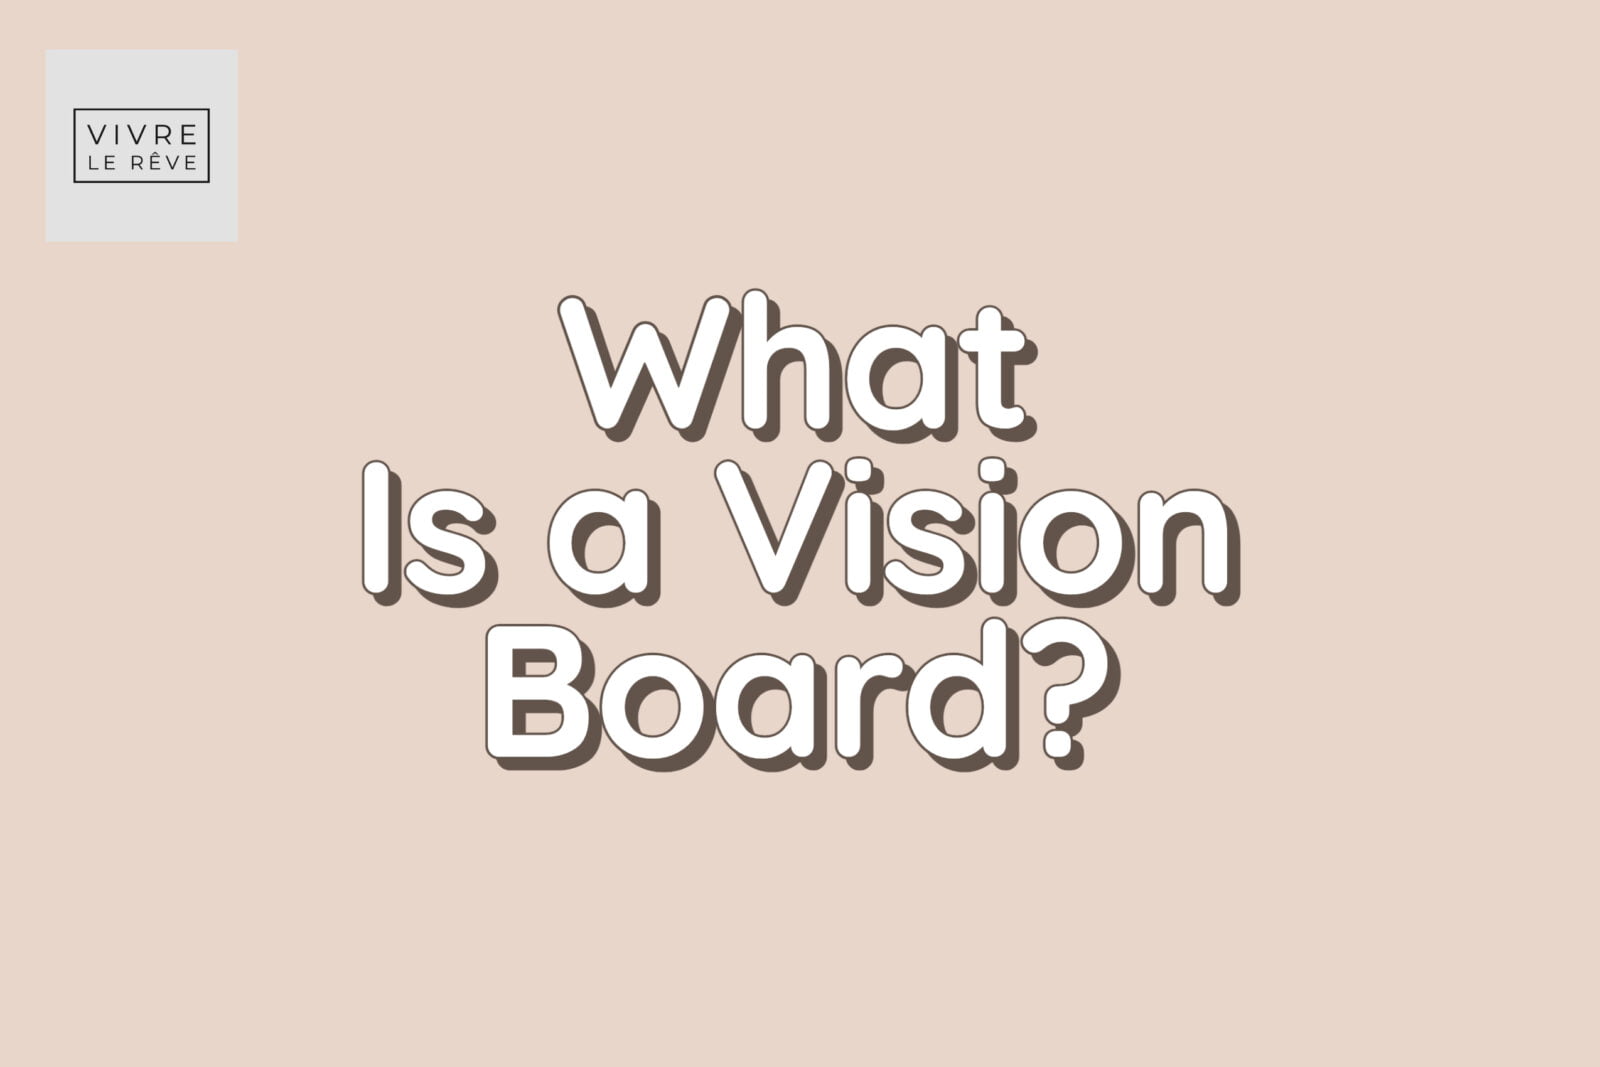 What Is a Vision Board?